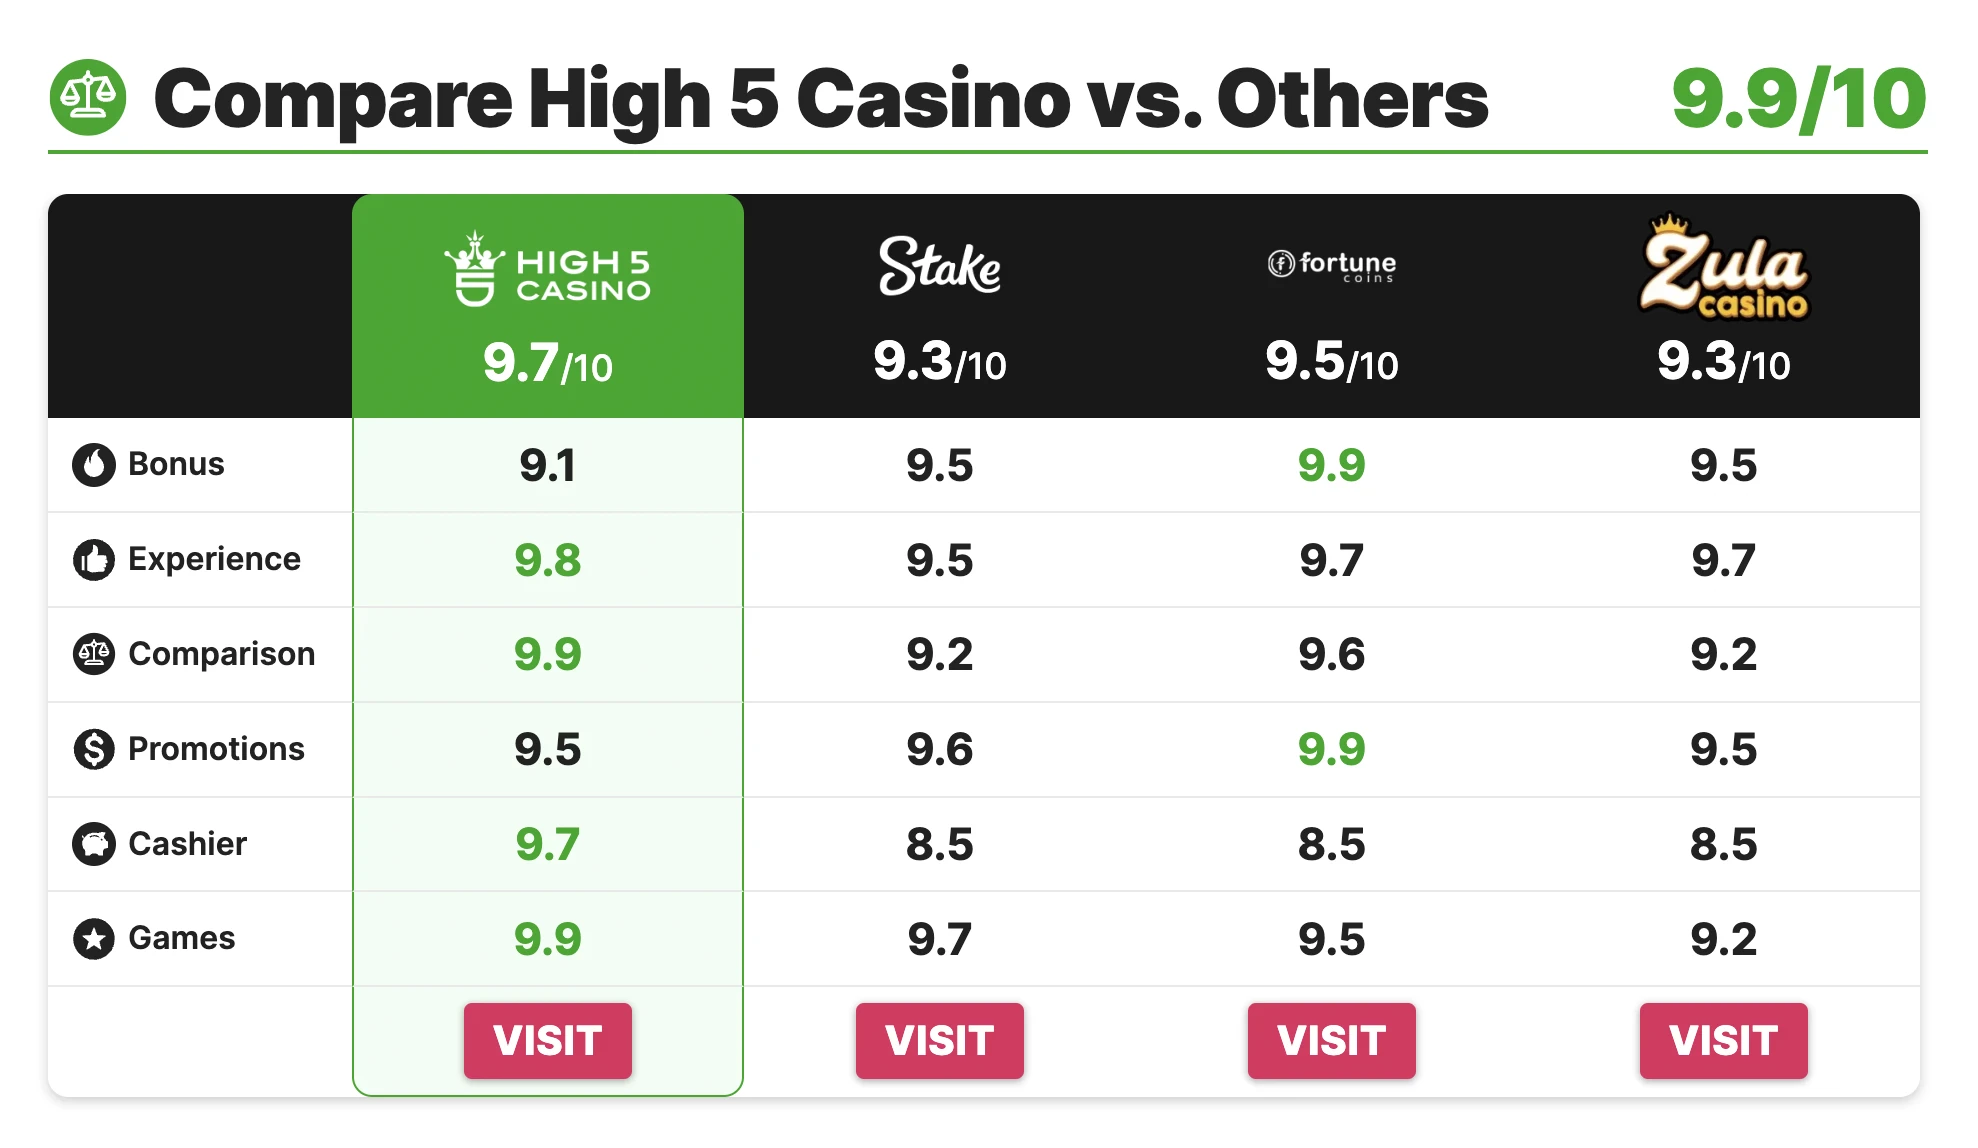 Sweepstakes Casino Review and rating system used by OddsSeeker.com